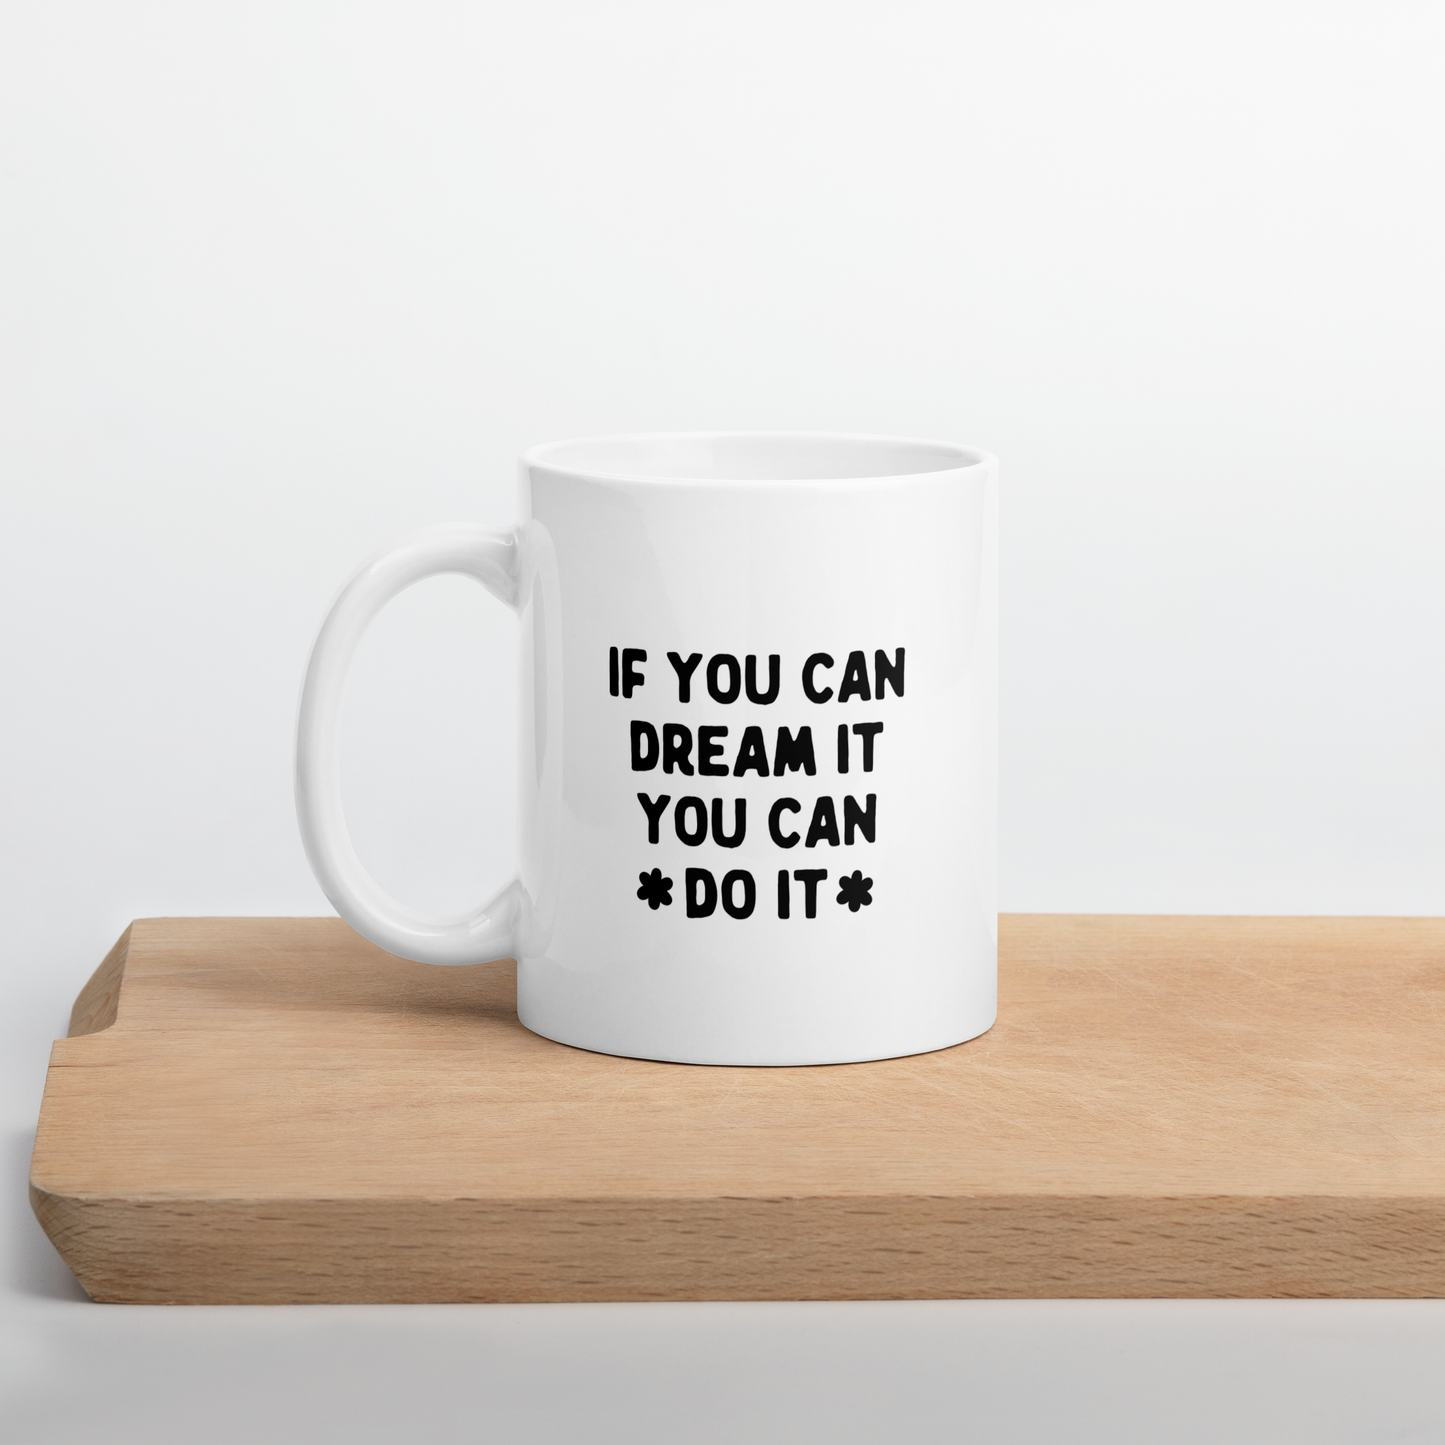 If You Can Dream It You Can Do It Mug